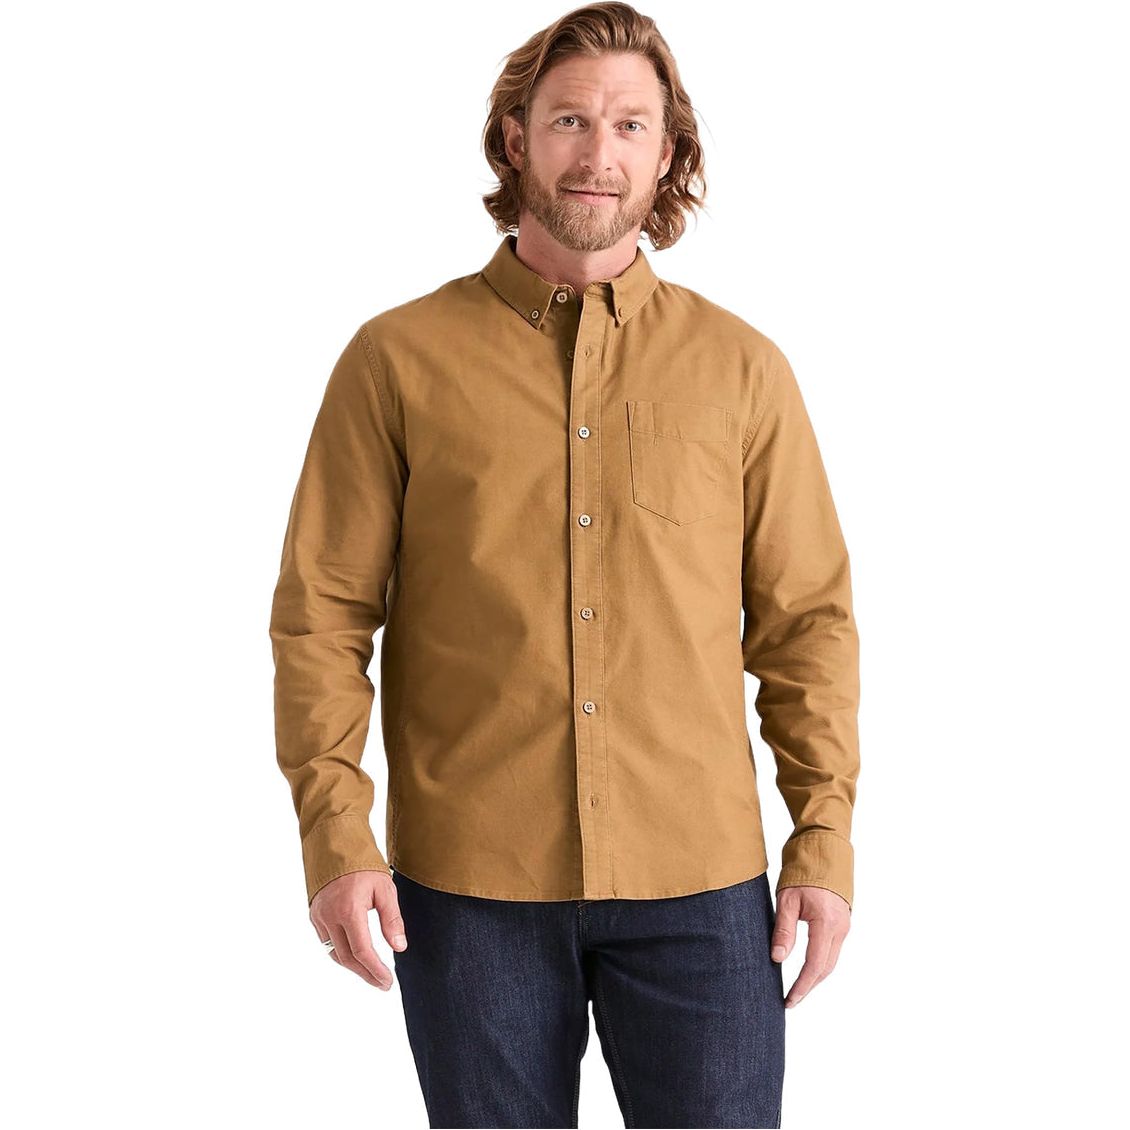 Chemise Performance Stretch pour Hommes|| Performance Stretch Button Shirt for Men's